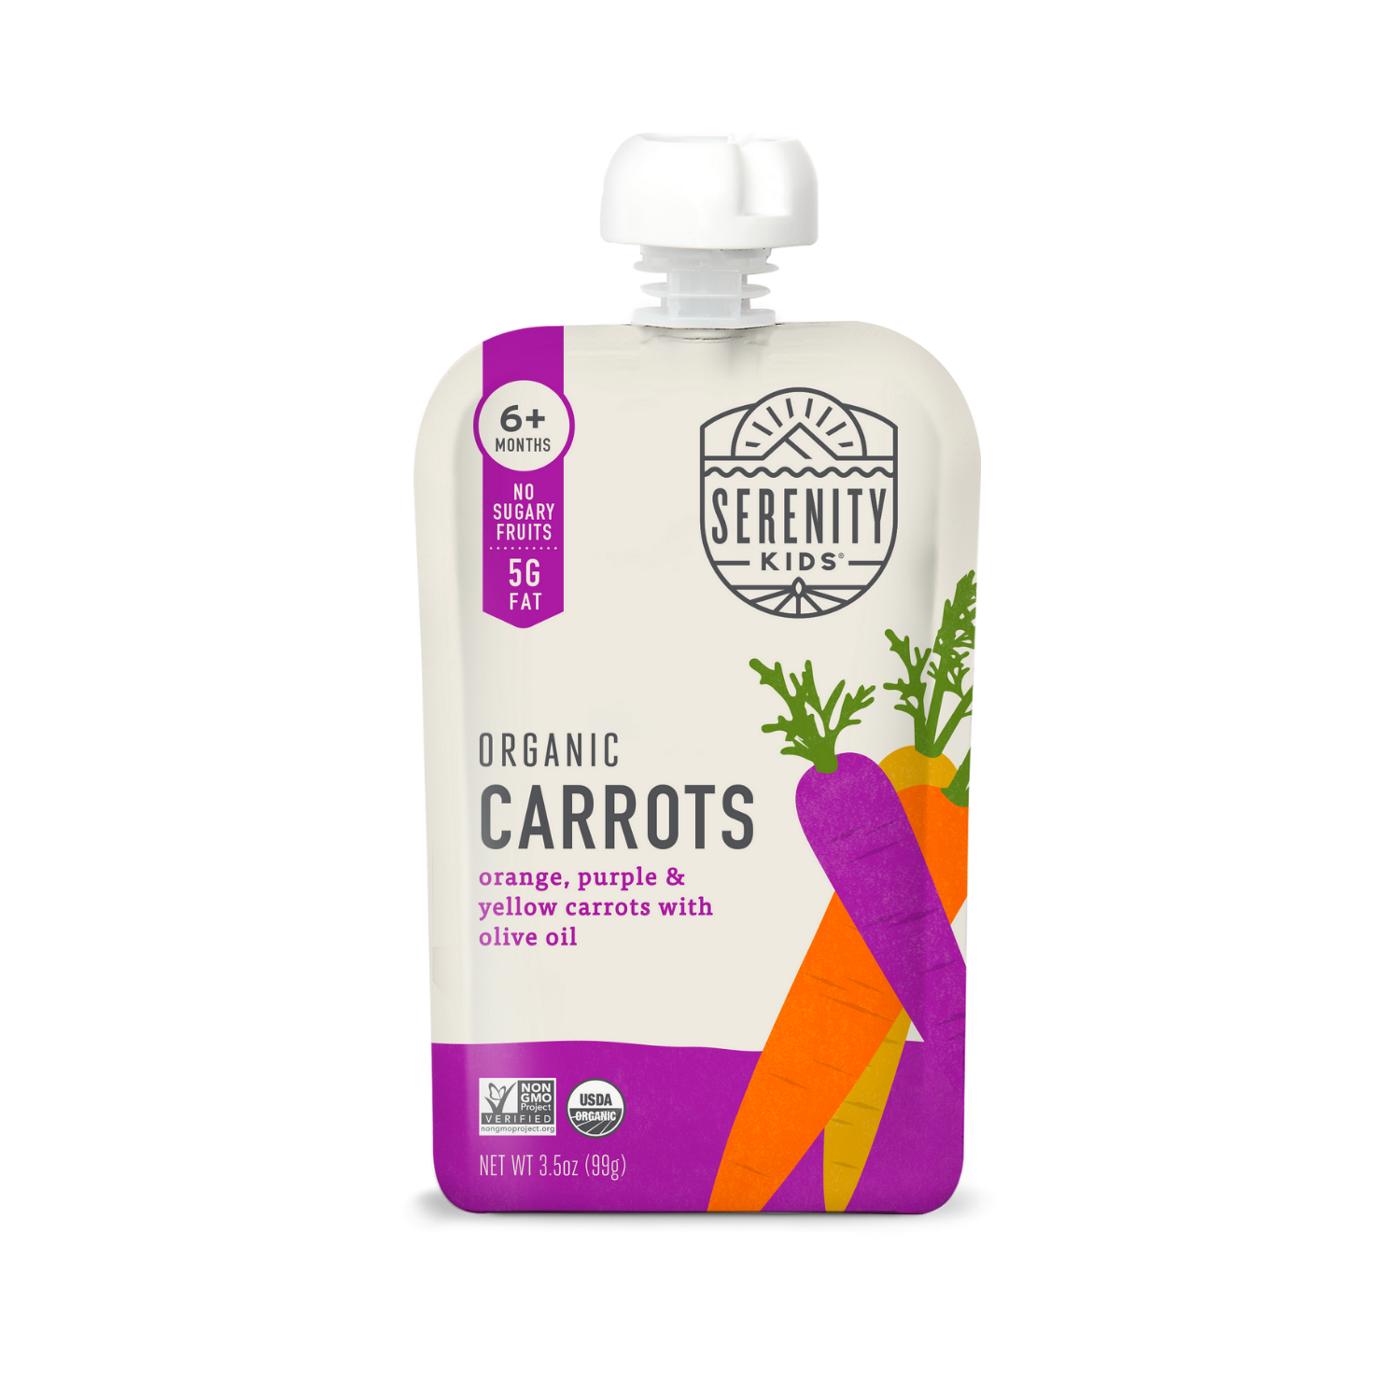 Serenity Kids Organic Carrot Medley Baby Food Pouch; image 1 of 7